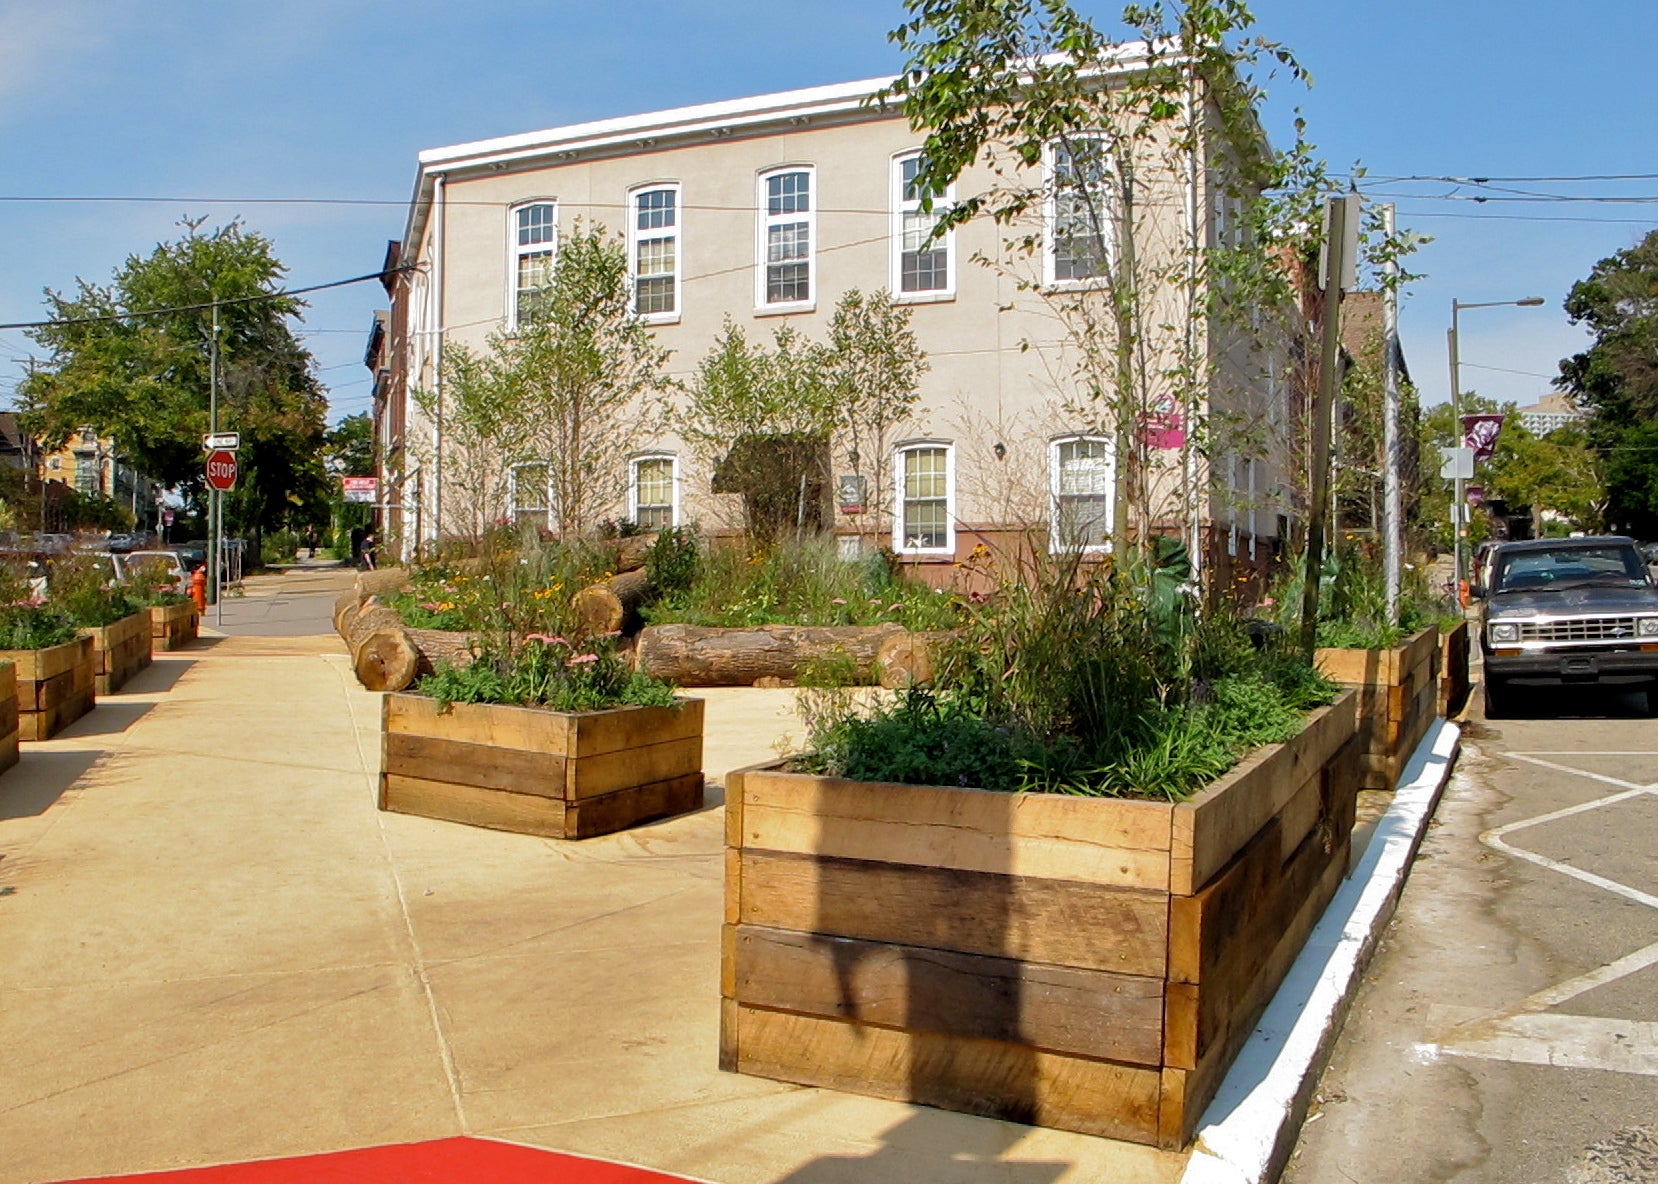 Woodland Green's planters are partly constructed from salvaged wood joists from a house rehab in University City.